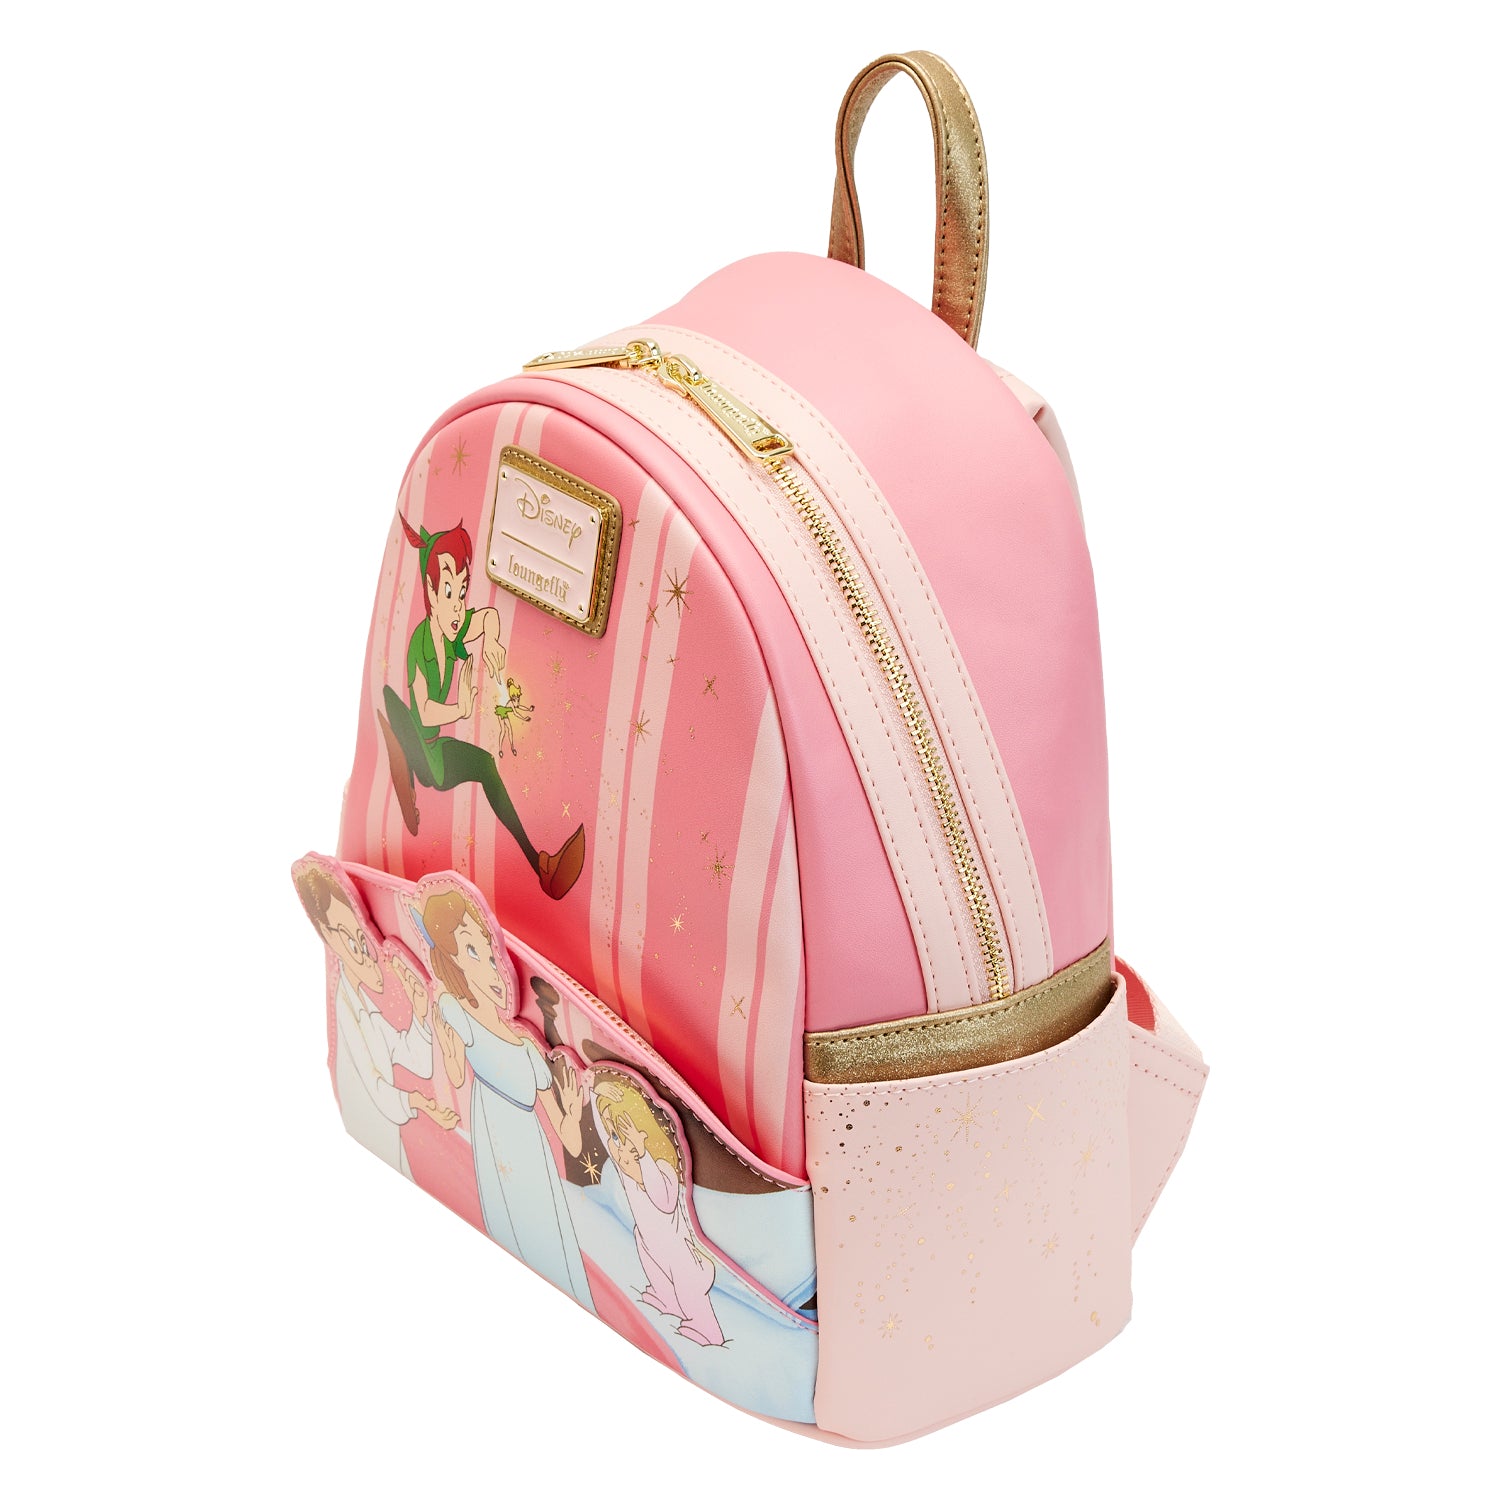 Disney | Peter Pan You Can Fly 70th Anniversary Mini Backpack